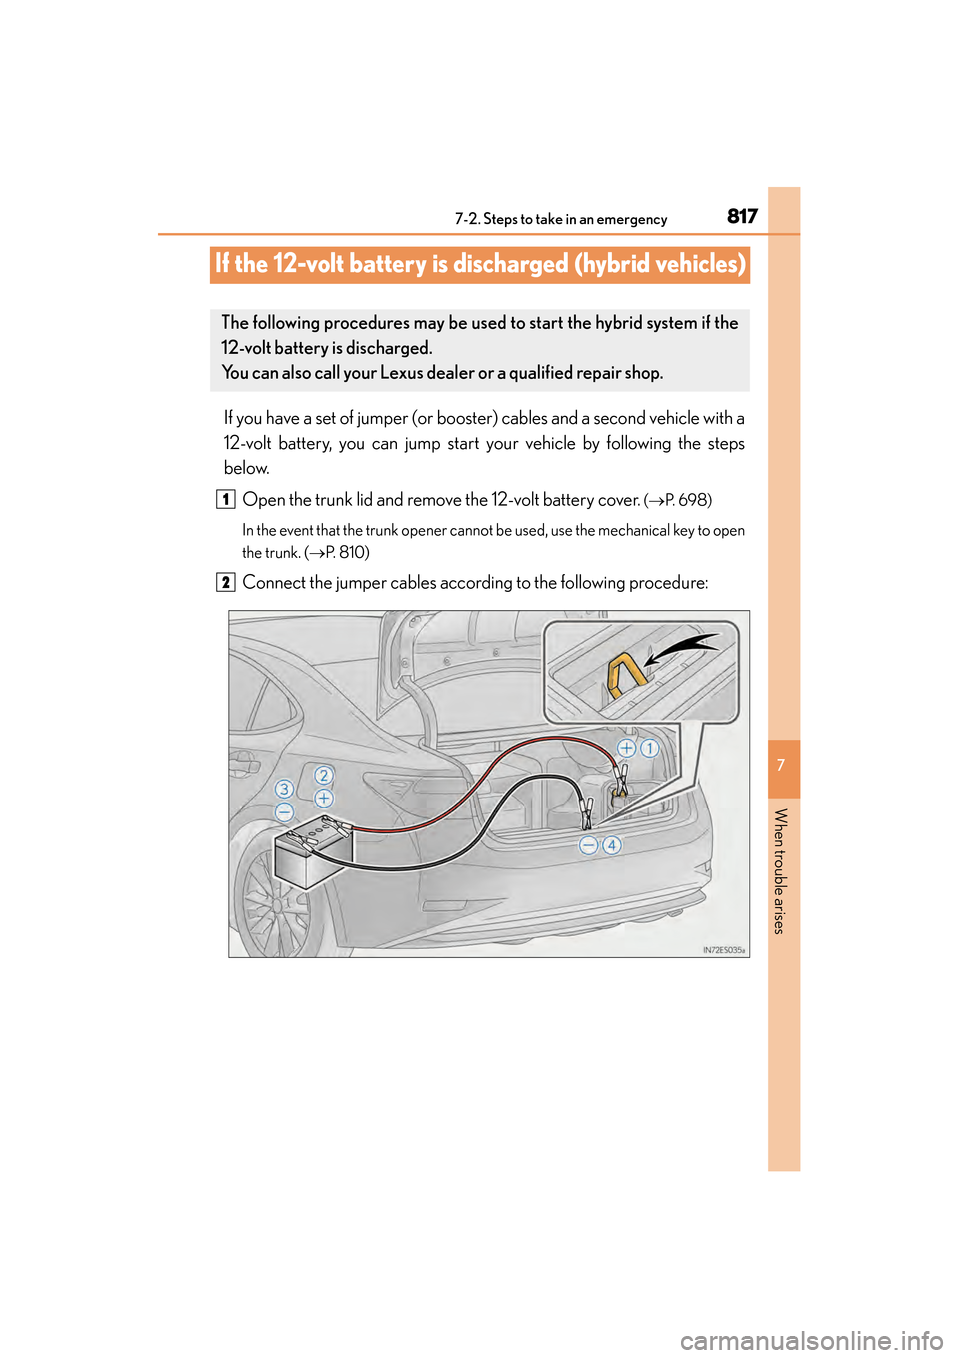 Lexus ES300h 2014  Owners Manual 817
ES350_300h_OM_OM33A60U_(U)
7
When trouble arises
7-2. Steps to take in an emergency
If the 12-volt battery is discharged (hybrid vehicles)
If you have a set of jumper (or booster) cables and a sec